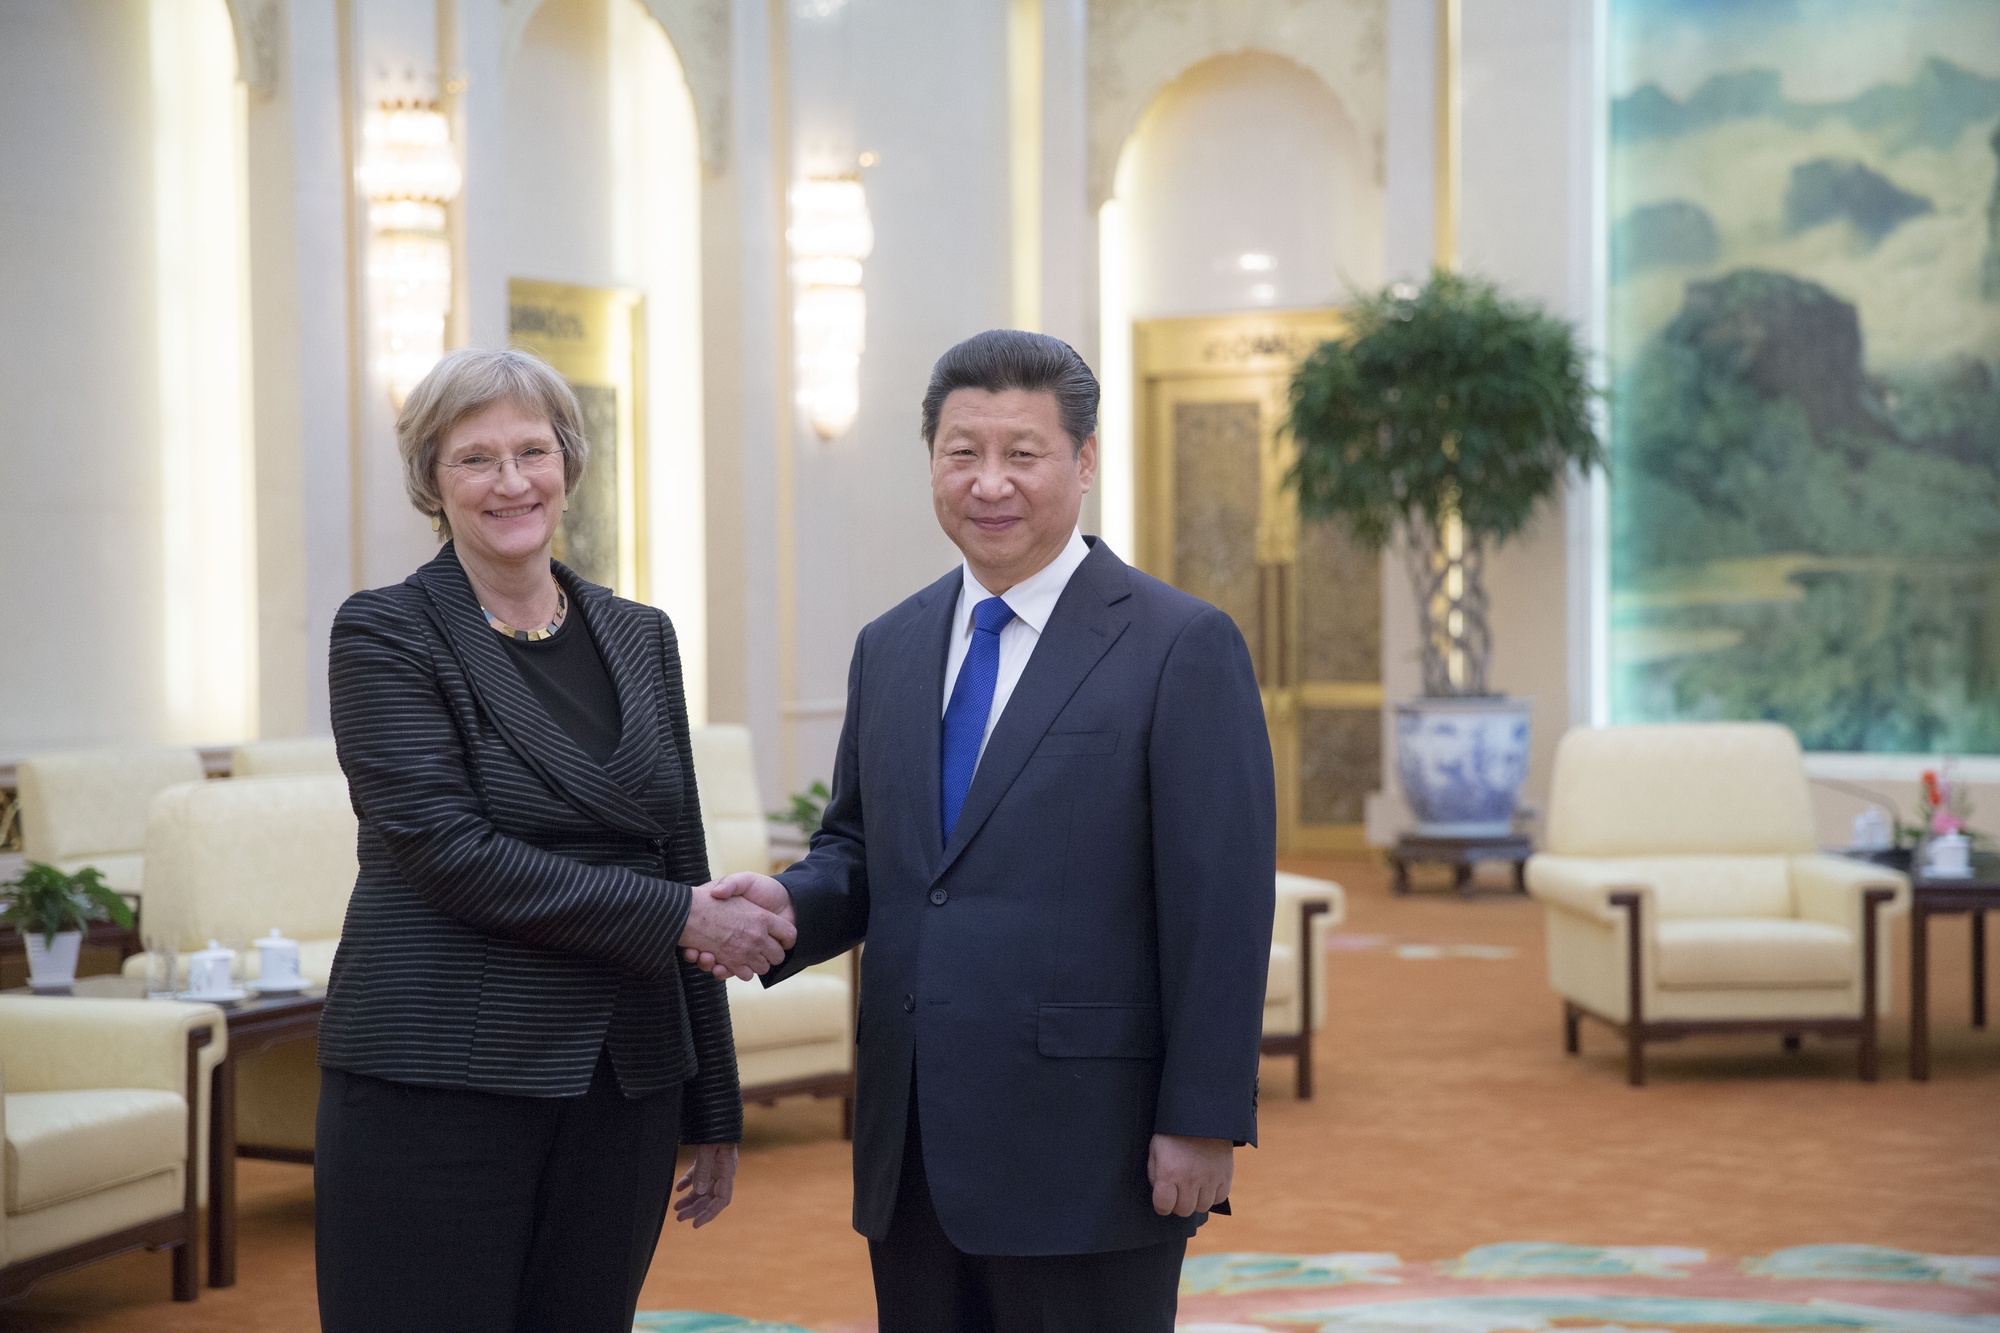 University President Drew G. Faust with President of China Xi Jinping 